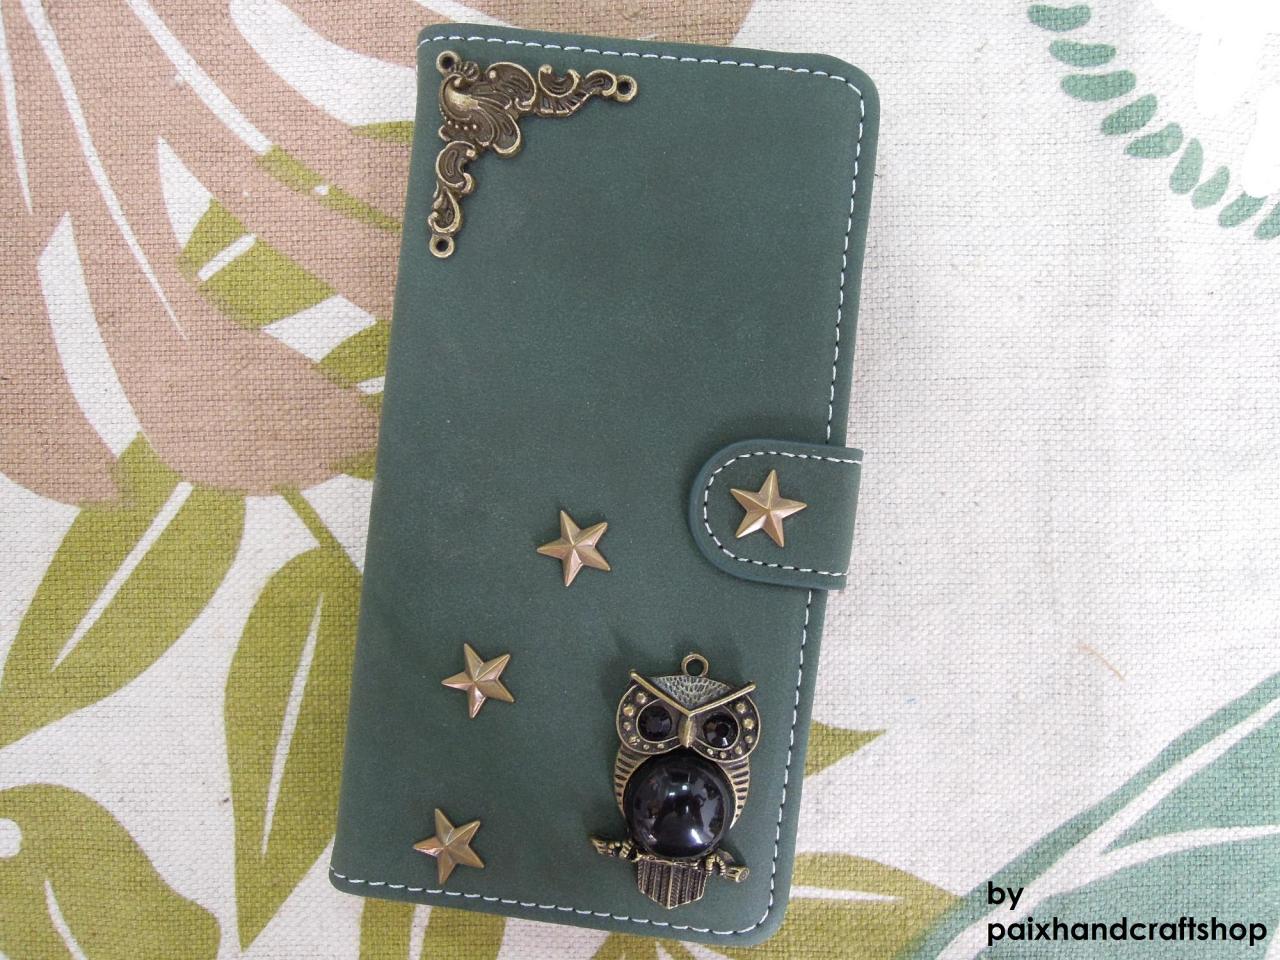 Iphone 6 Wallet Case/iphone 6 Plus Wallet Case-owl/star/plant Studded Army Green Iphone 6/6 Plus Wallet Case-credit Card Case